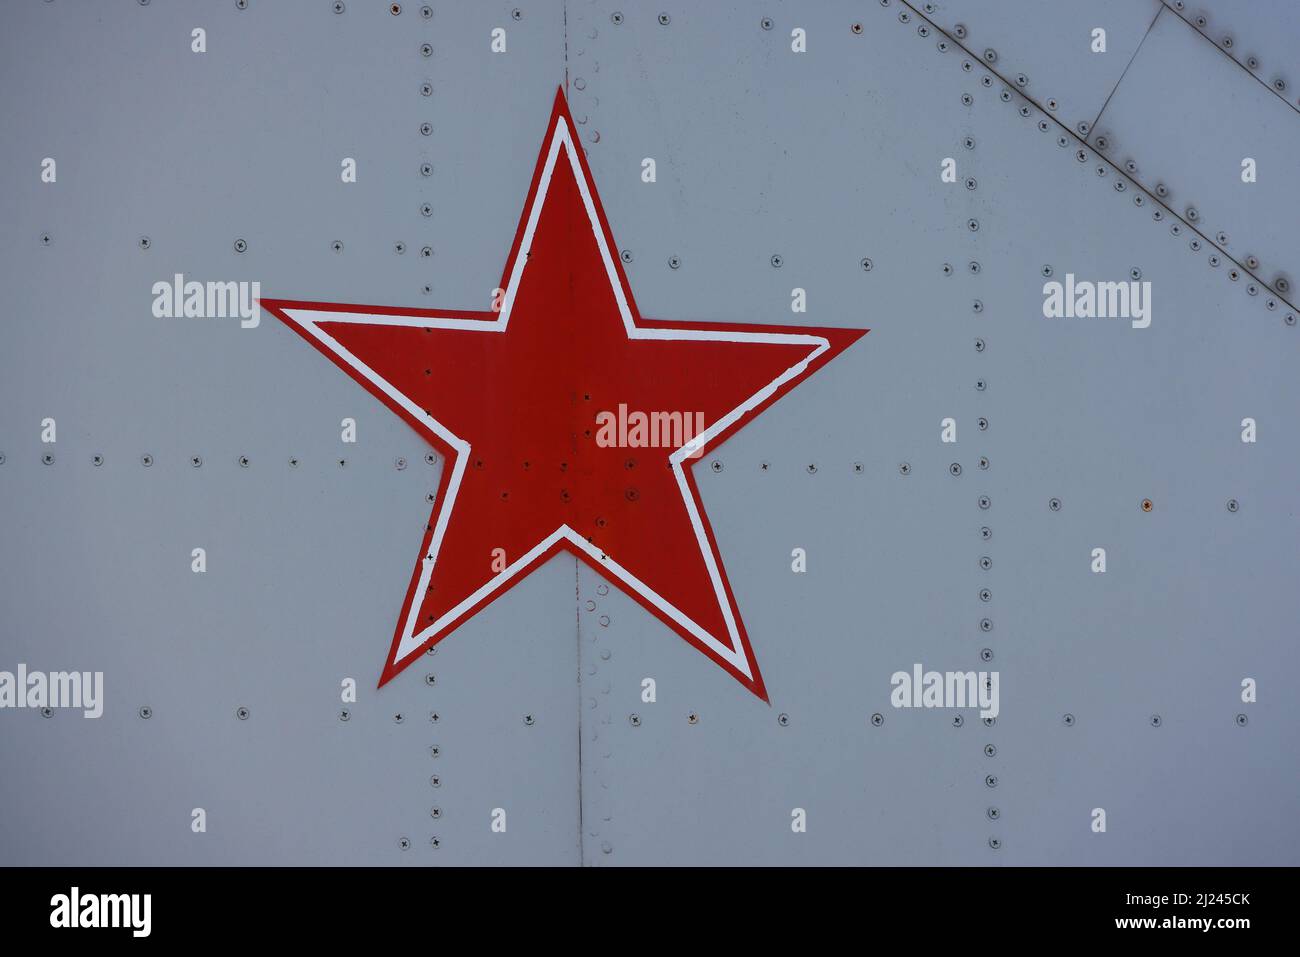 Close up Soviet Union or Russian red star symbol painted on vintage military fighter aircraft studded metal surface Stock Photo